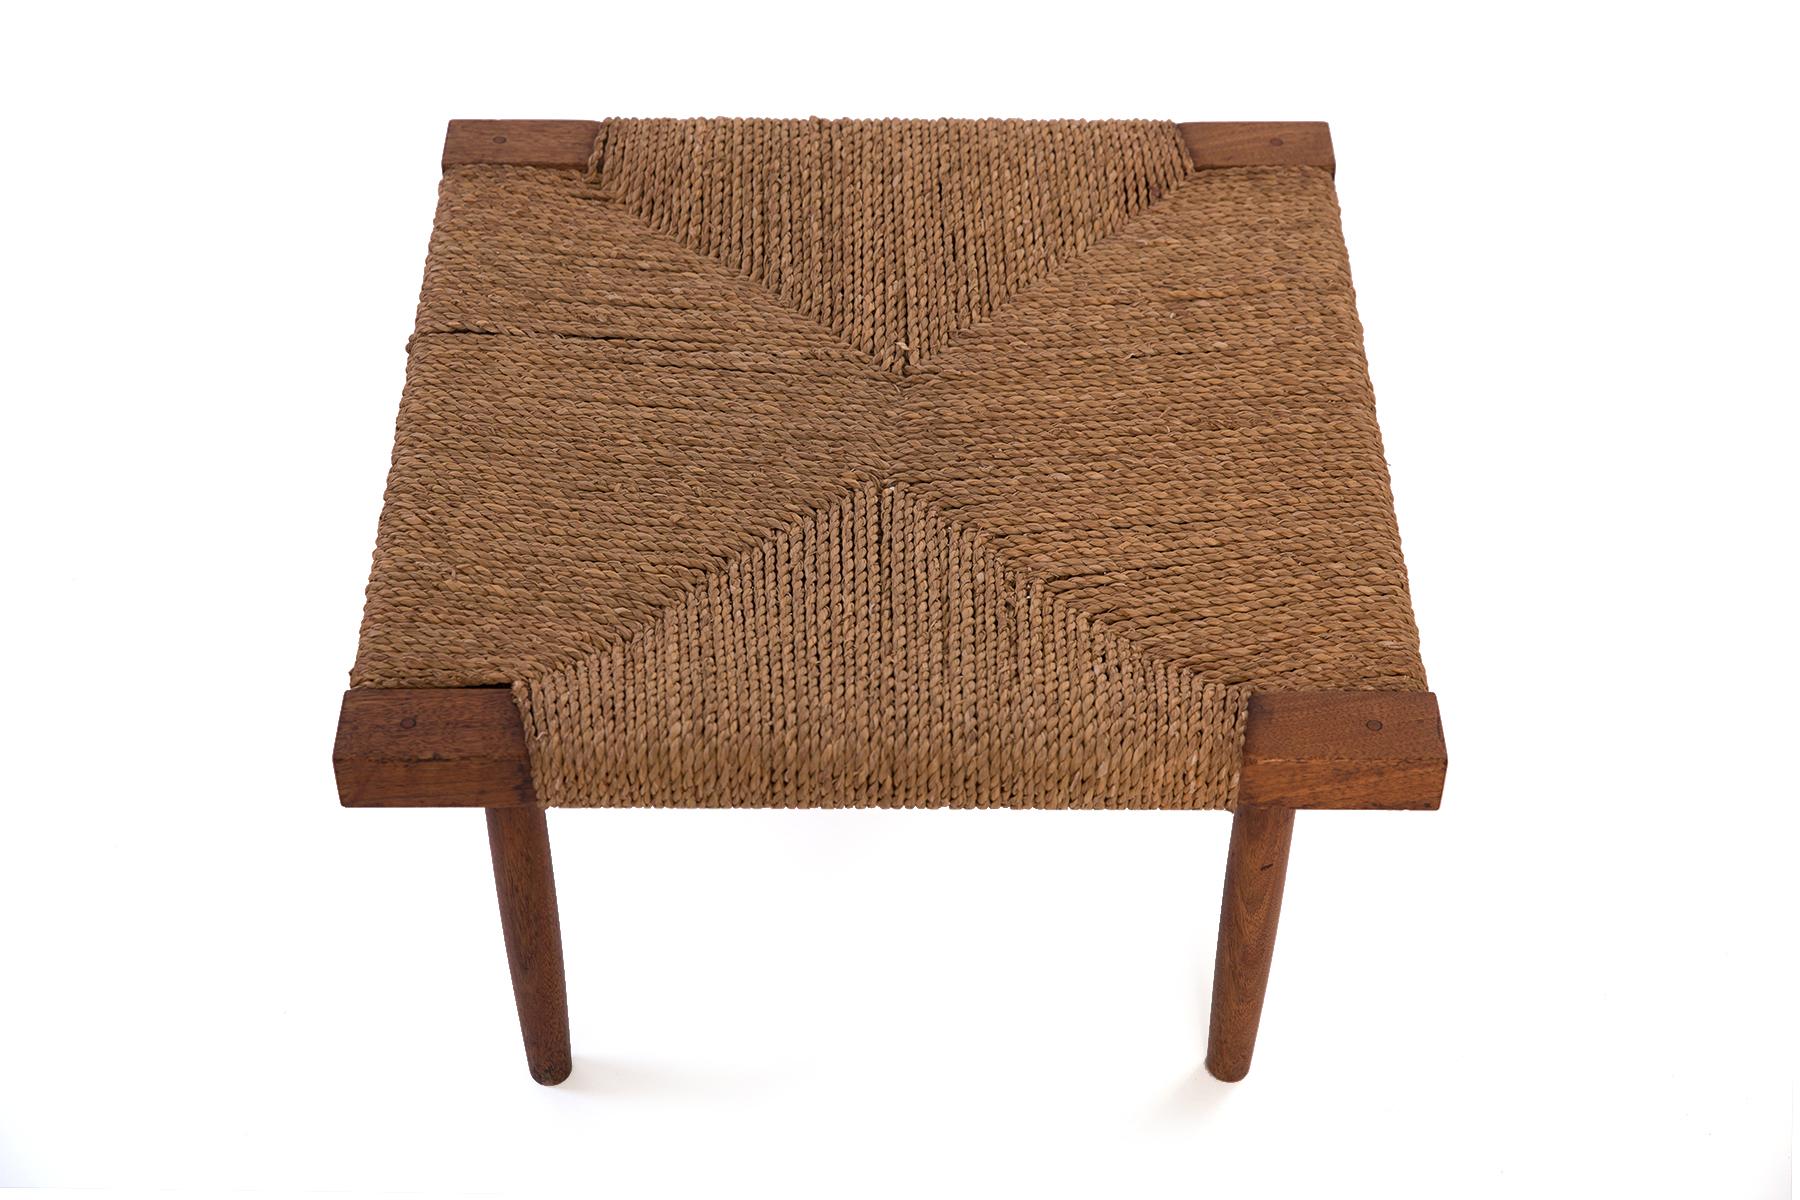 This is a fine all original example of George Nakashima's Fitch stool in walnut with grass cord seat, reflecting Nakashima's reverence for fine craftsmanship and natural materials.